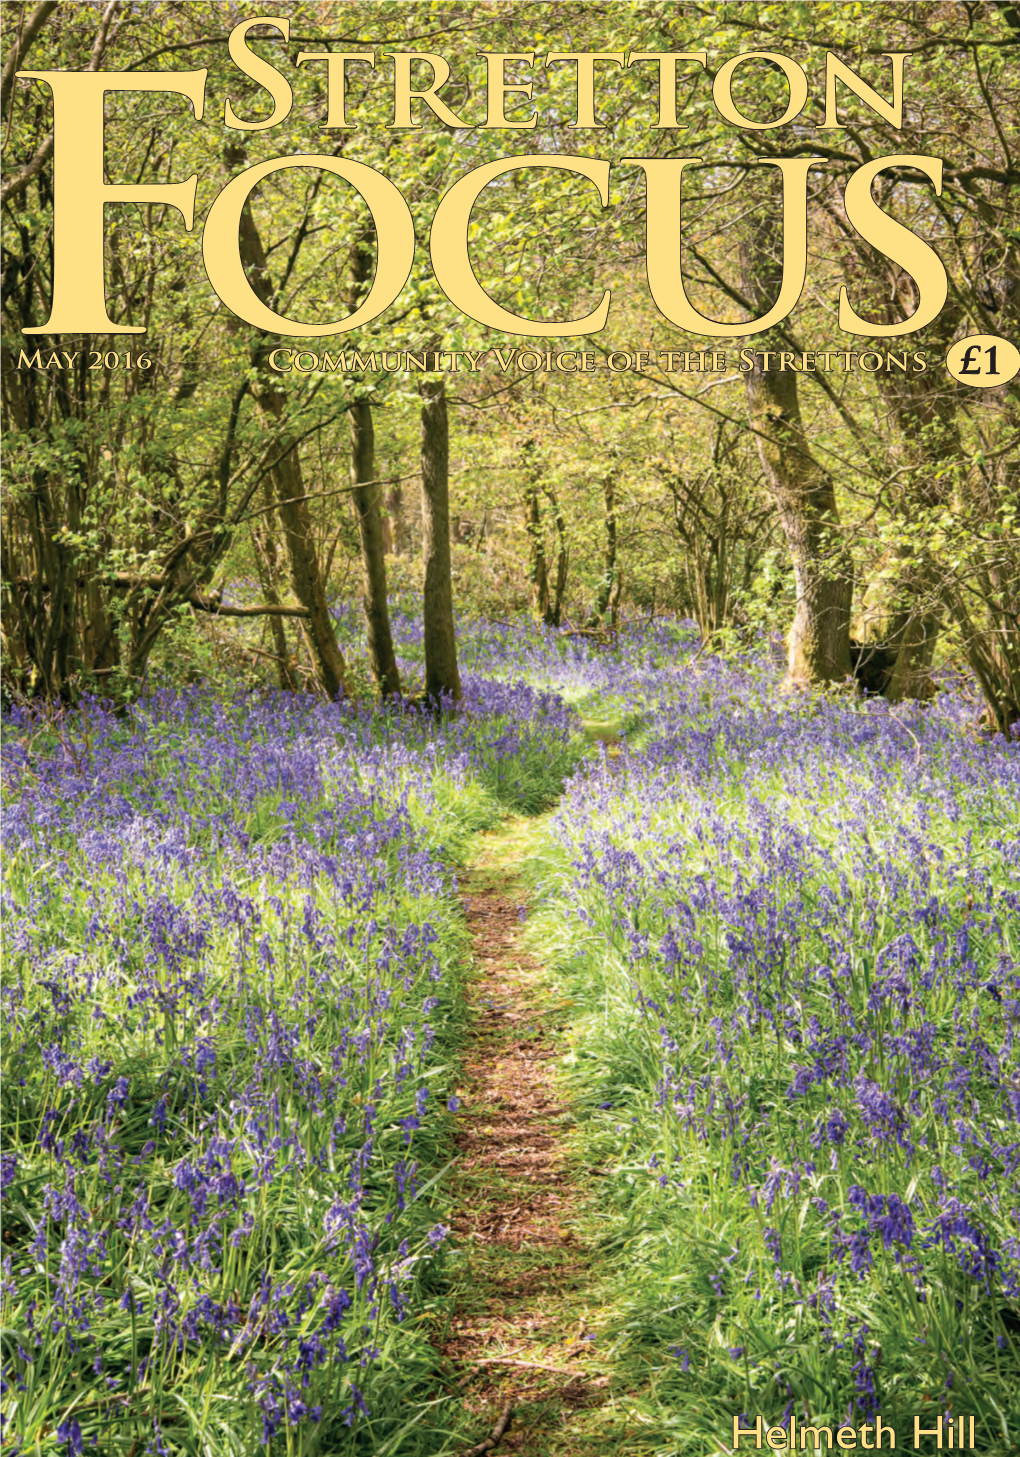 Stretton Focus (Founded 1967) Average Monthly Sales 1,485 Copies in Focus (About 63% of Dwellings in Church Stretton) What’S on in the Strettons in May